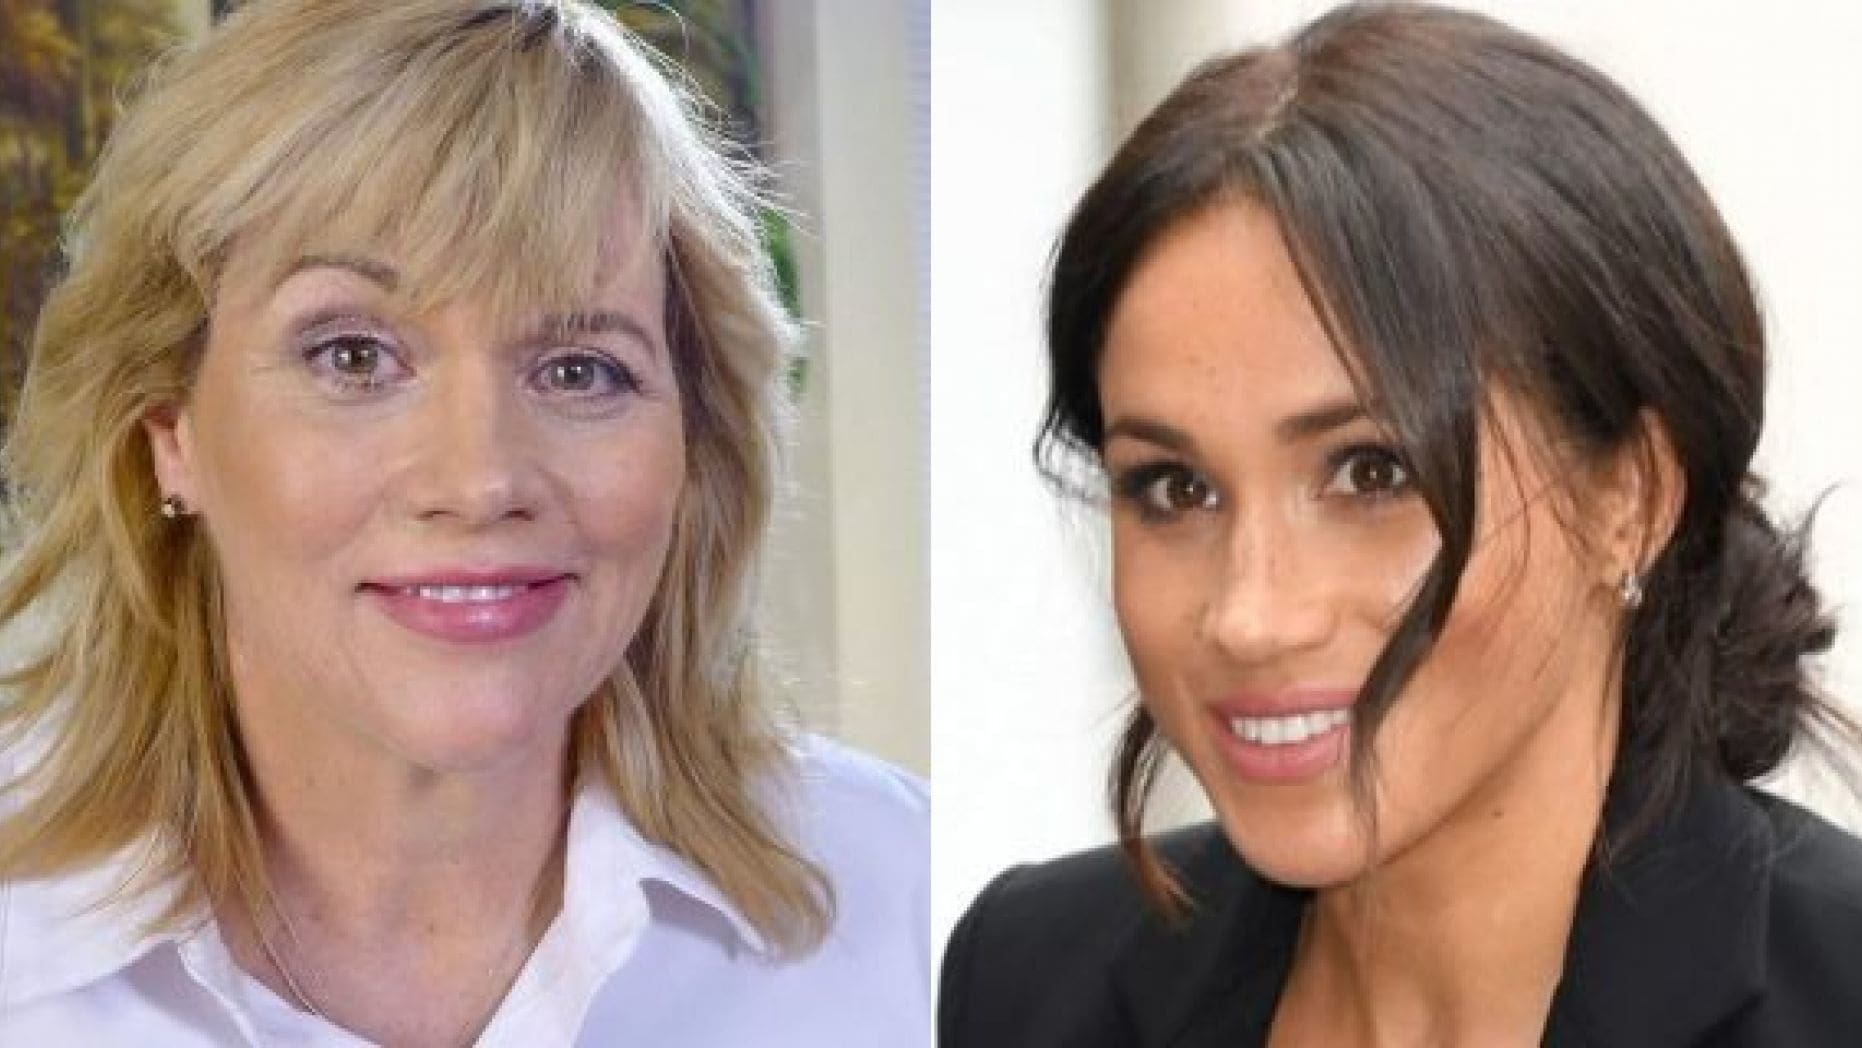 ”samantha-markle-is-now-on-the-polices-fixated-persons-list-as-a-reputational-risk-to-sister-meghan-and-the-royals”